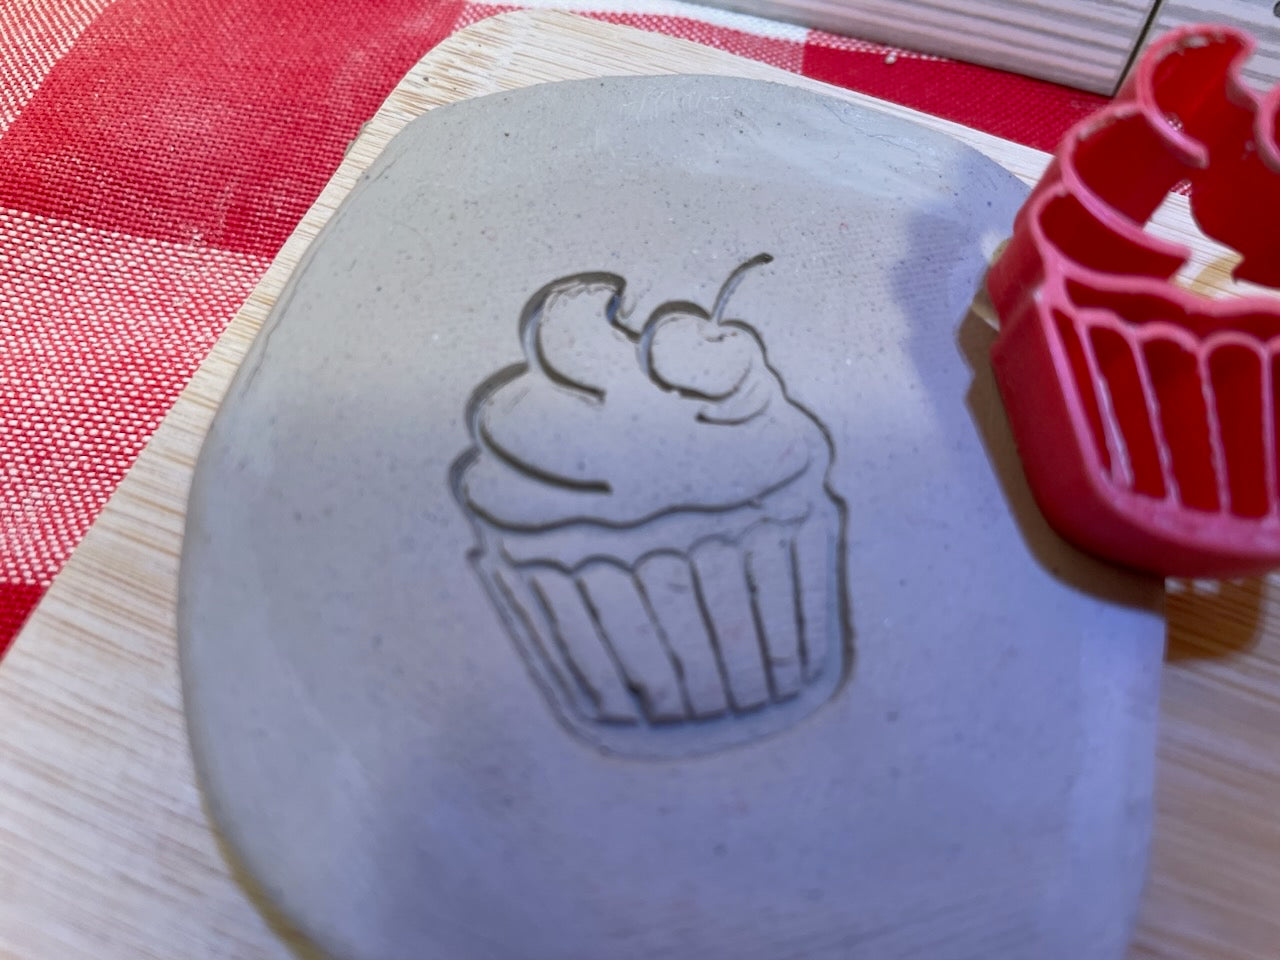 Cupcake Pottery Stamp - December 2023 mystery box, plastic 3D printed, multiple sizes